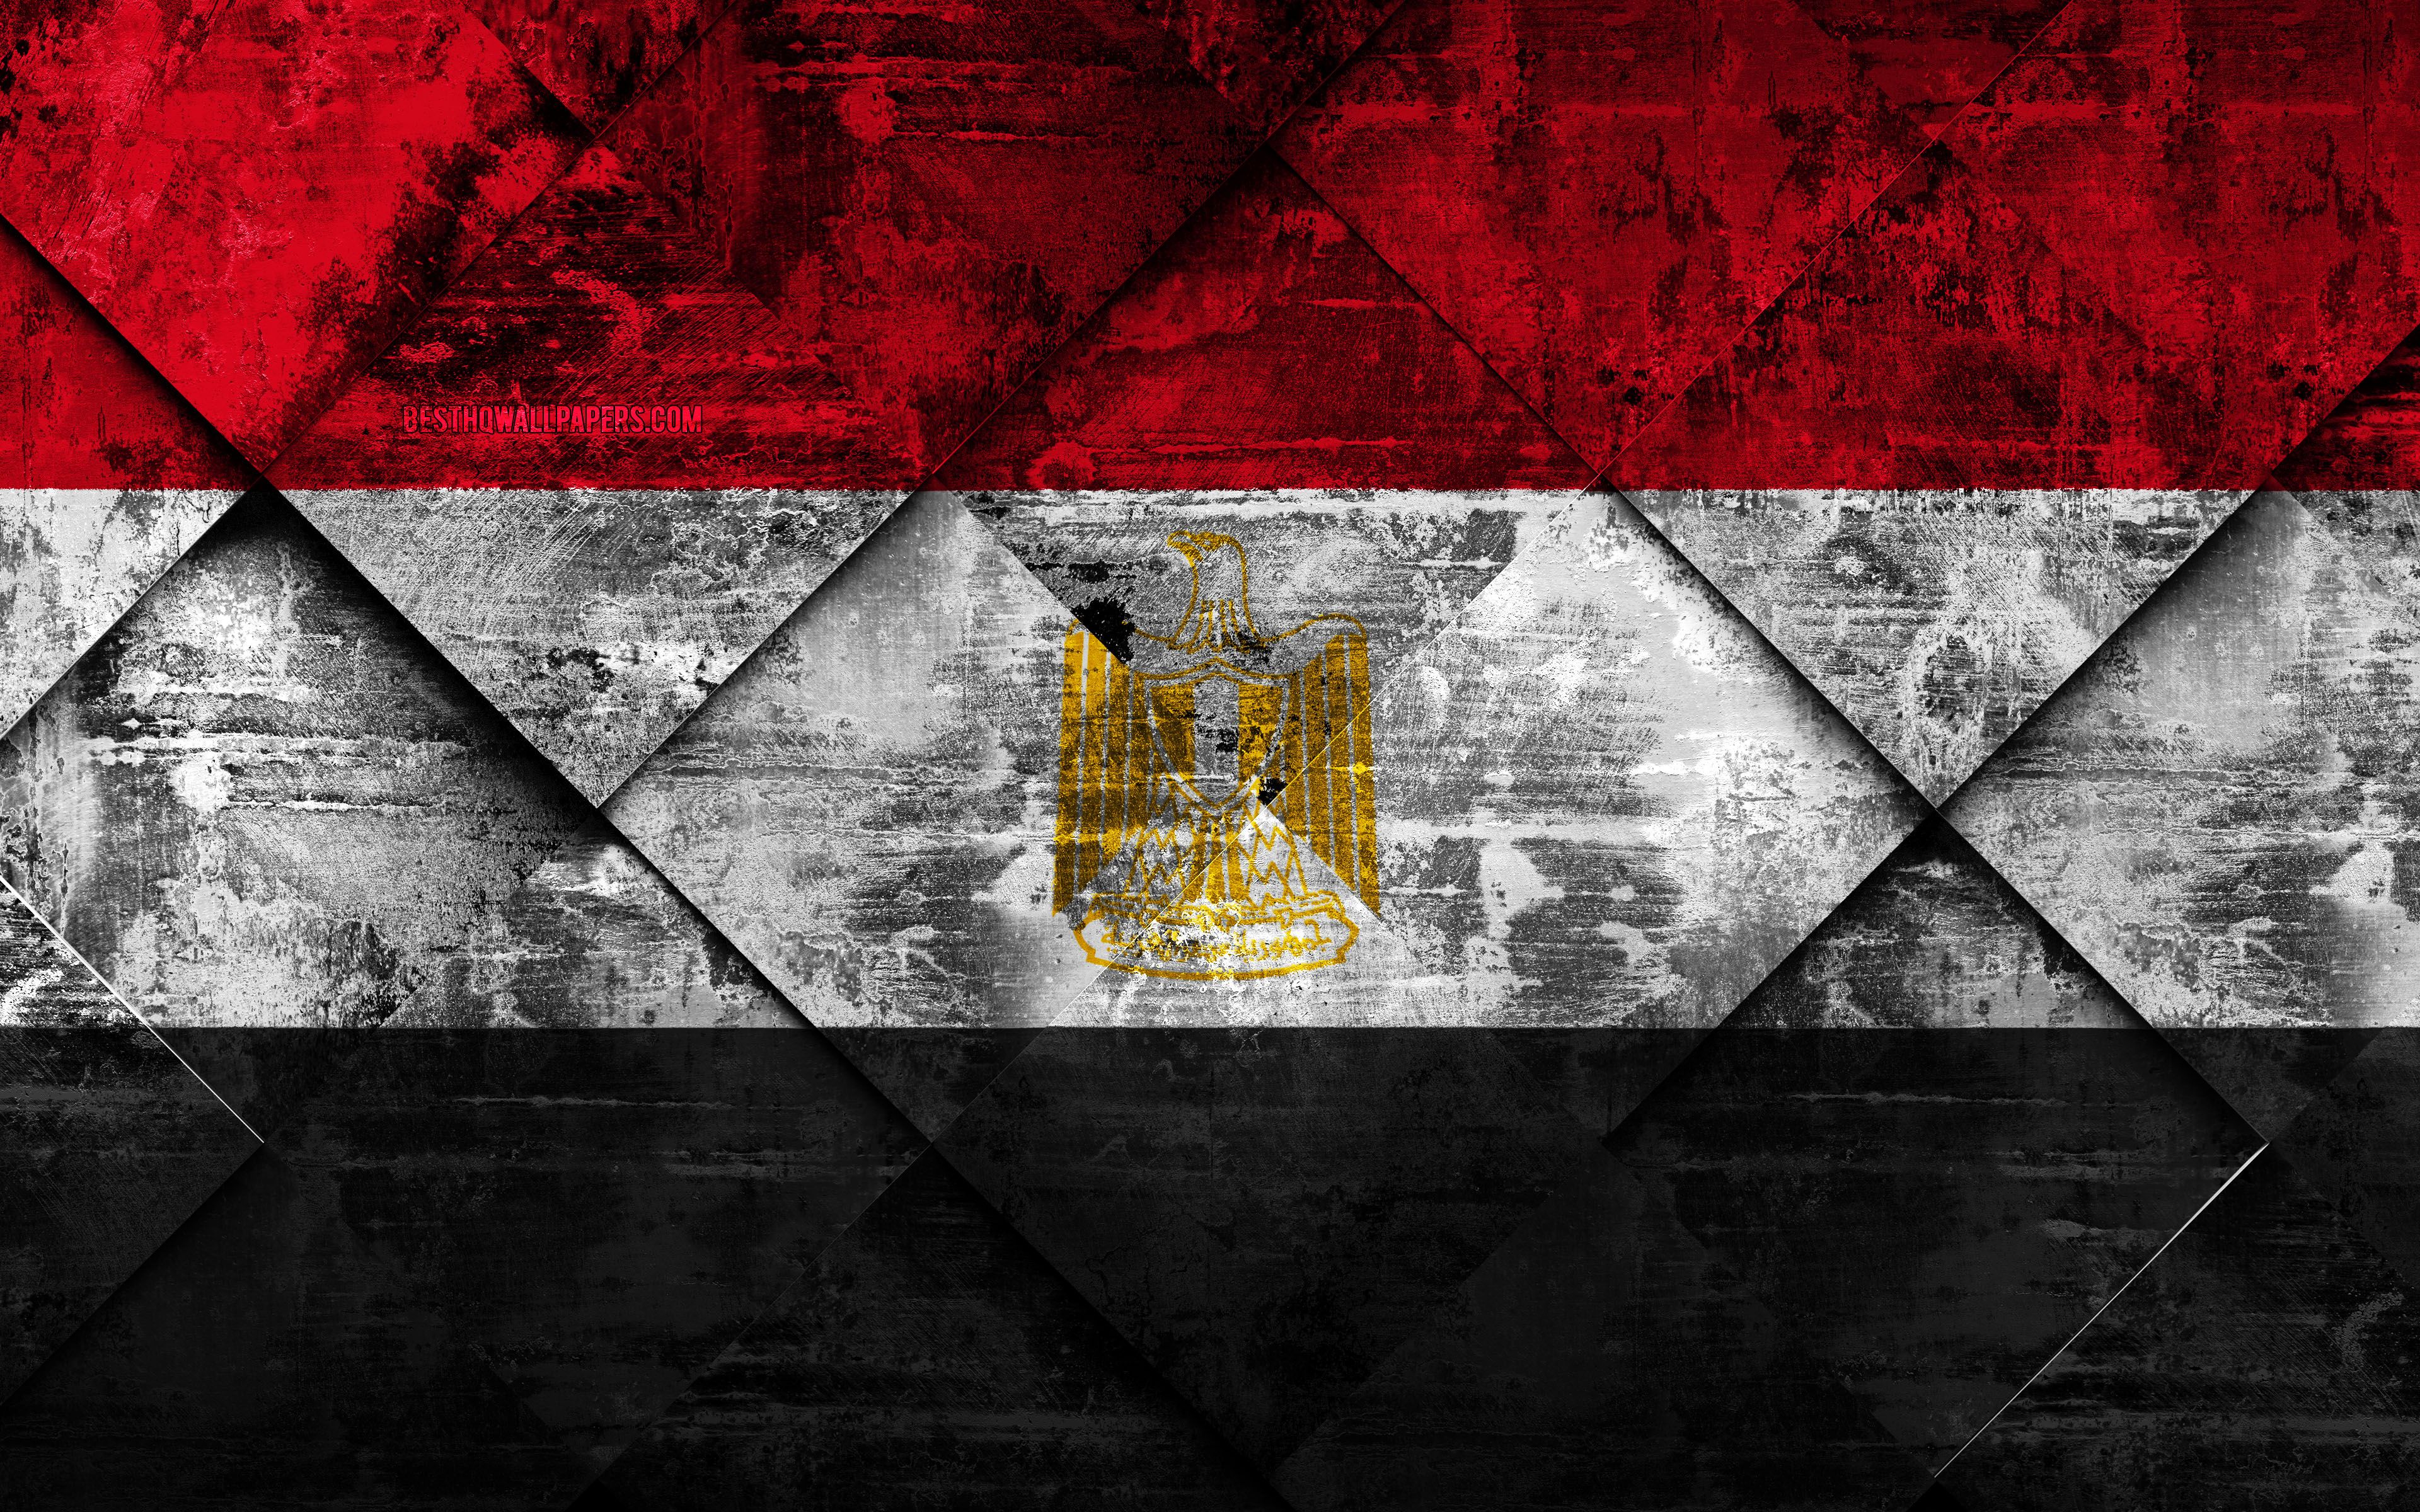 Download wallpaper Flag of Egypt, 4k, grunge art, rhombus grunge texture, Egyptian flag, Africa, national symbols, Egypt, creative art for desktop with resolution 3840x2400. High Quality HD picture wallpaper